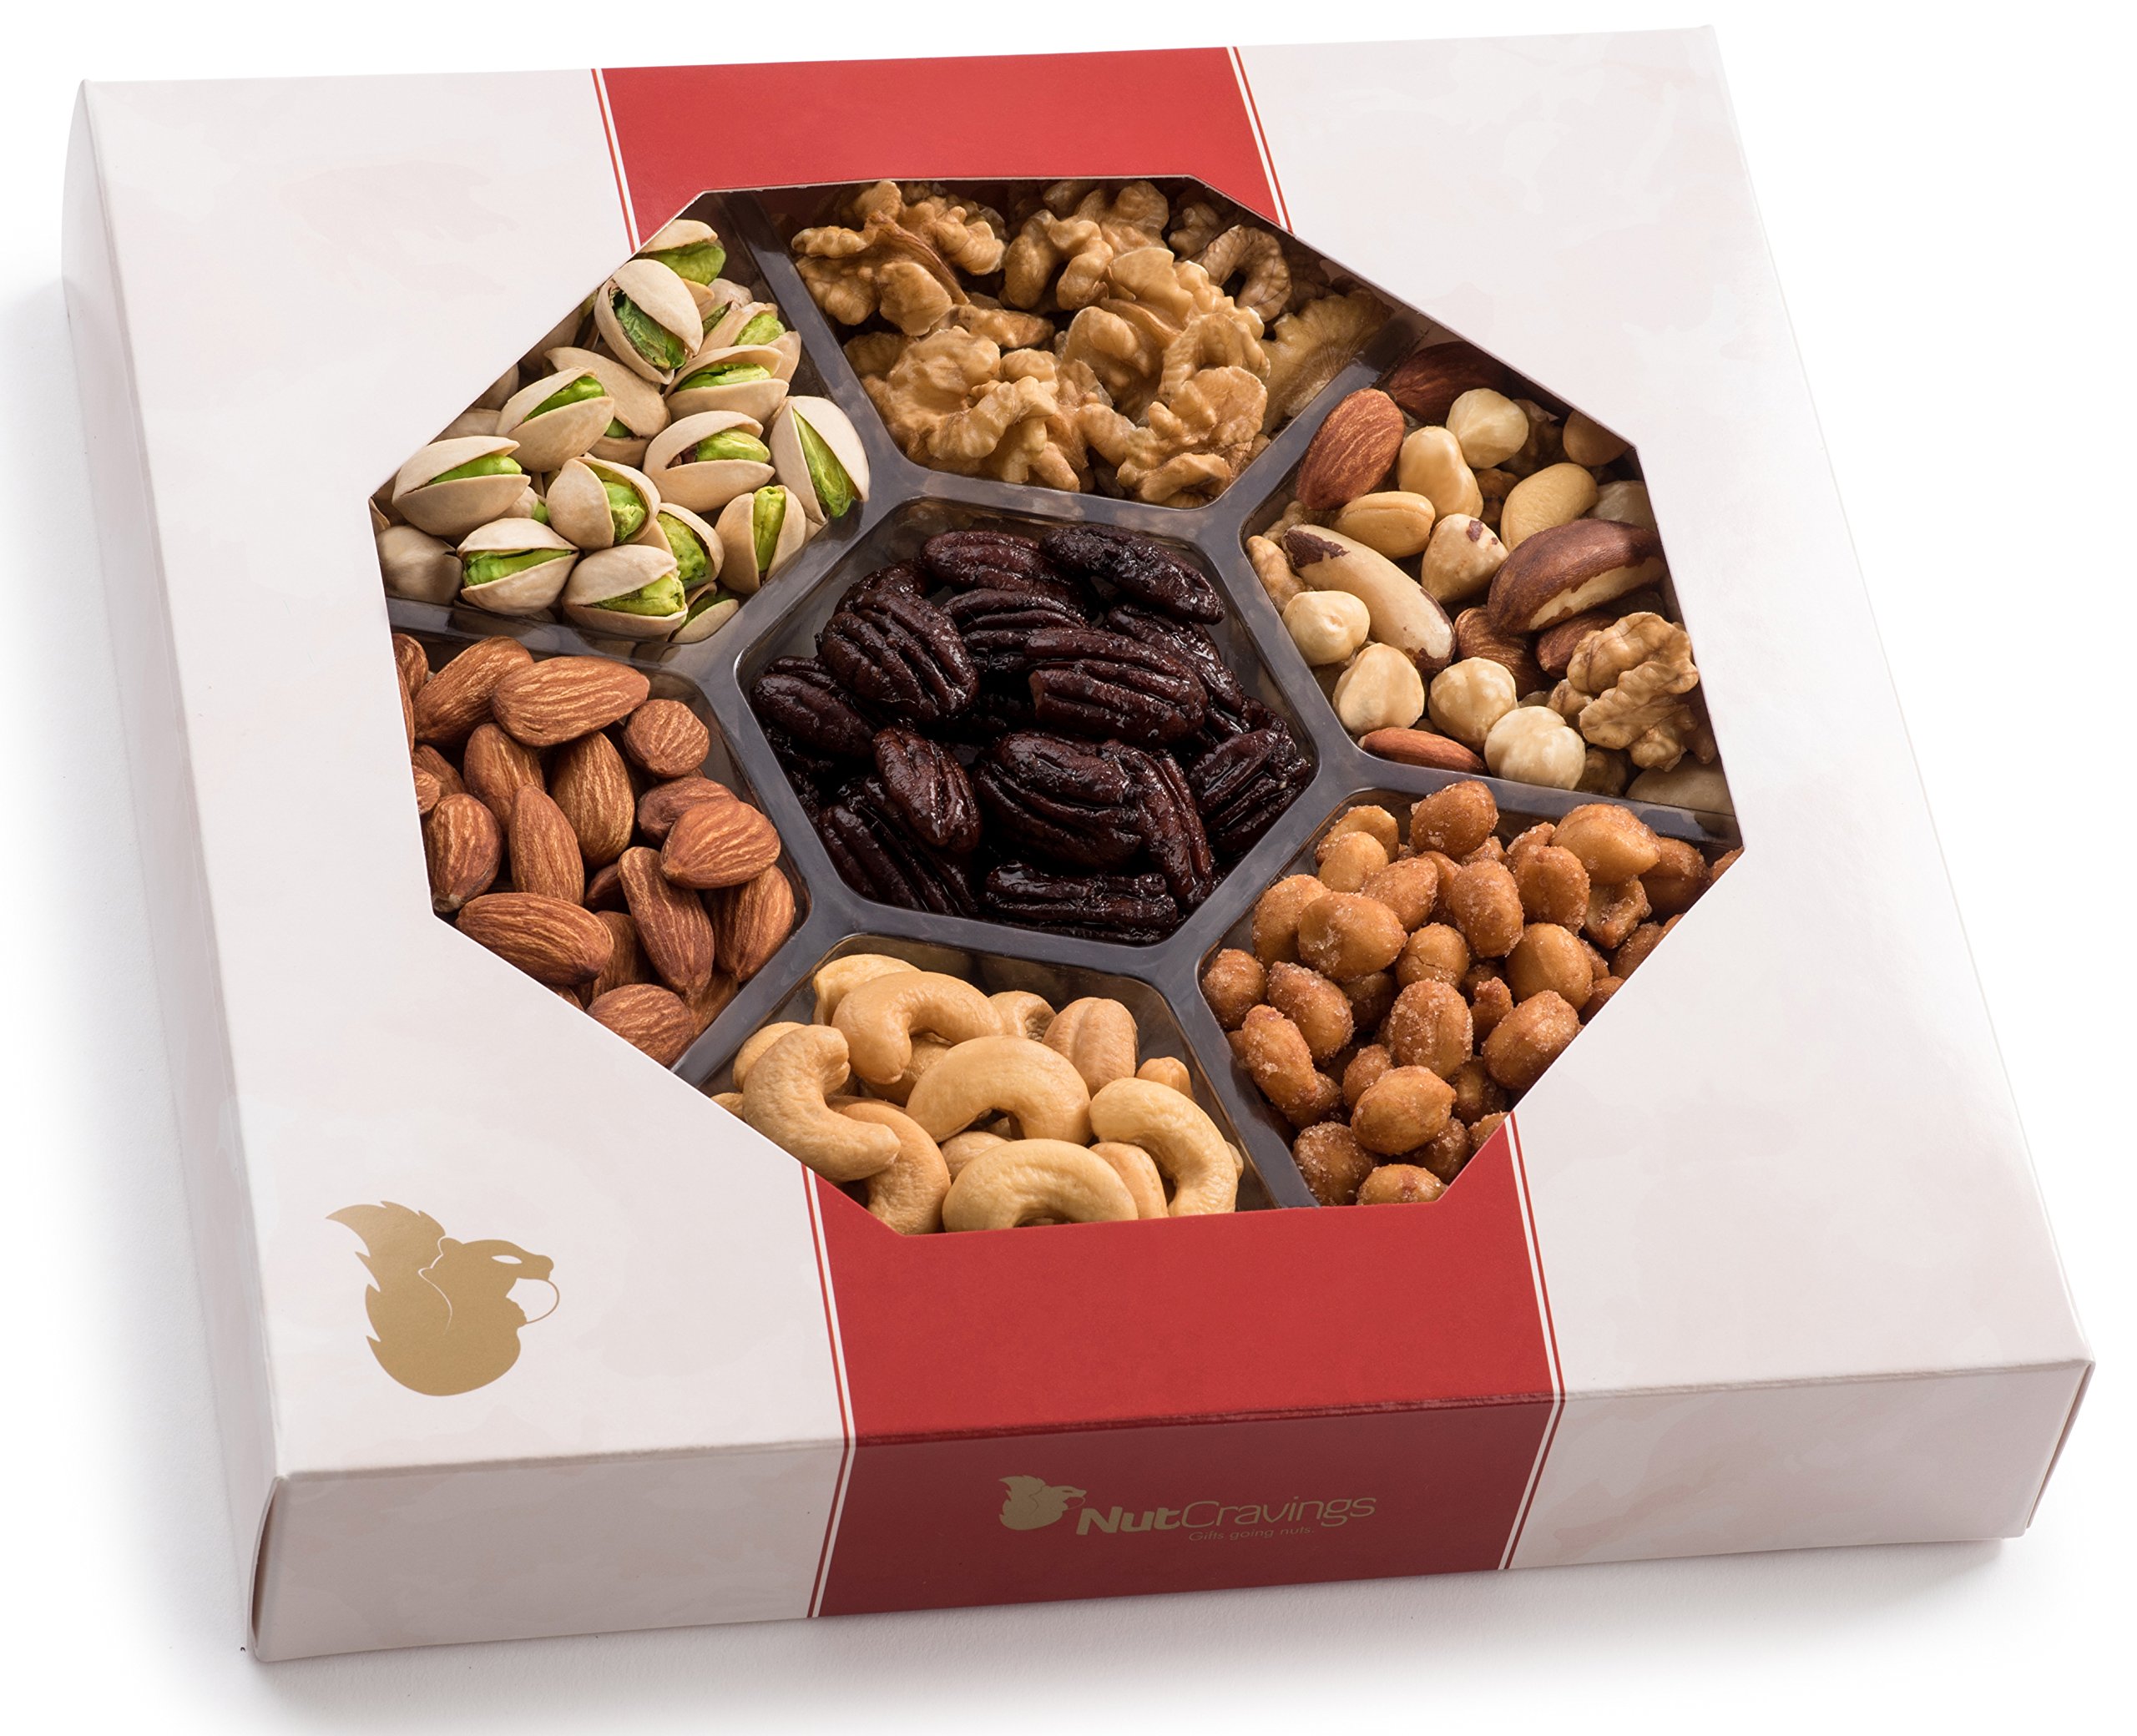 Amazon.com : Nut Cravings Father's Day Gift Baskets - Extra-Large 7 ...